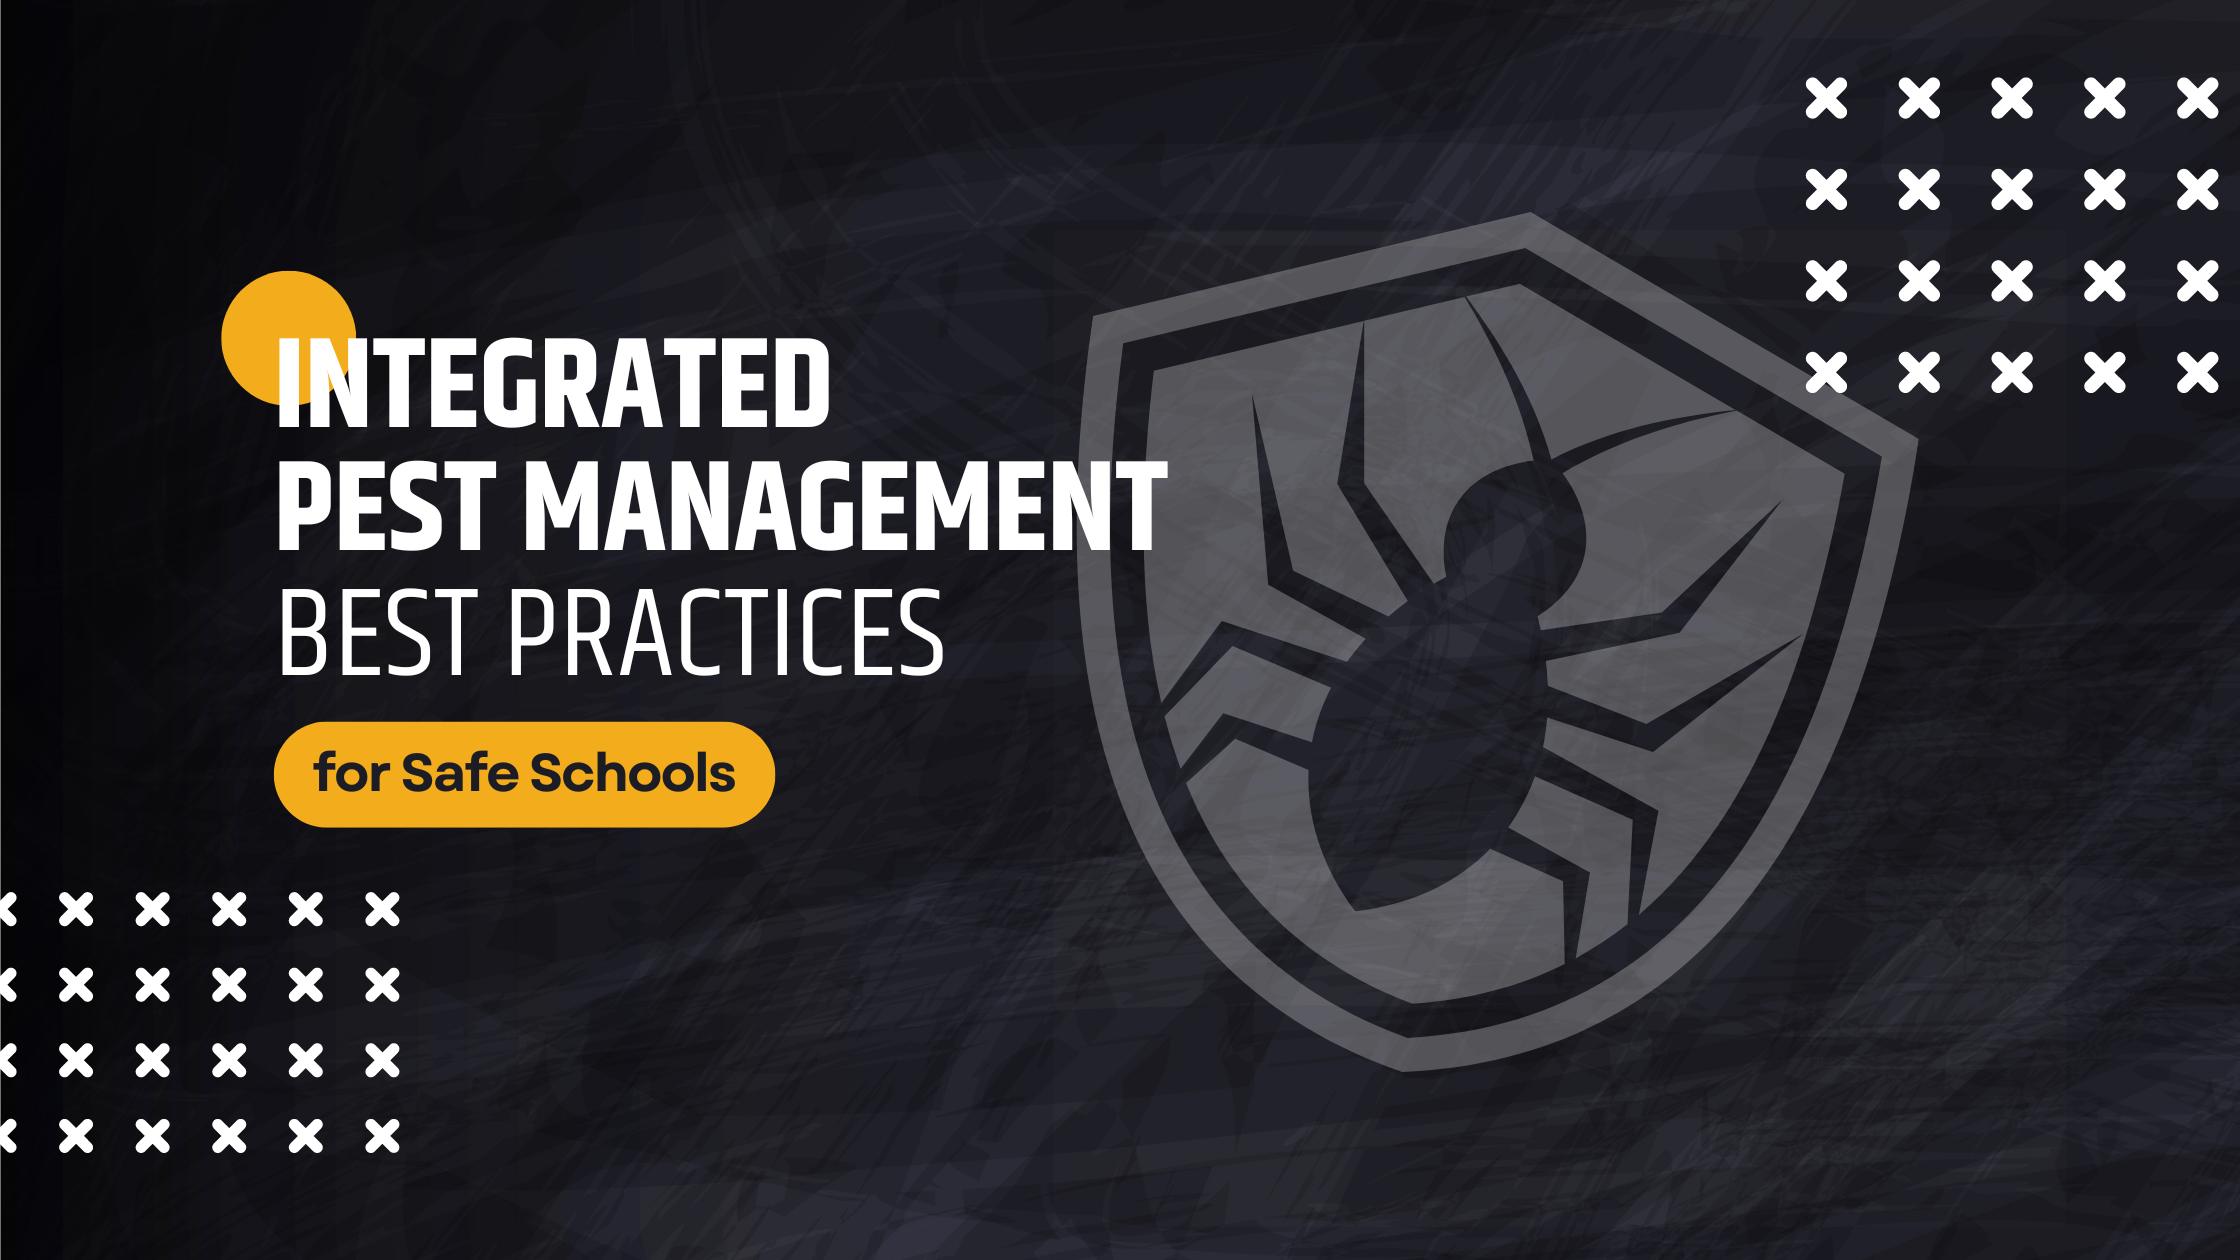 Integrated Pest Management Best Practices for Safe Schools graphic on chalkboard with transparent bug shape in a badge graphic illustration